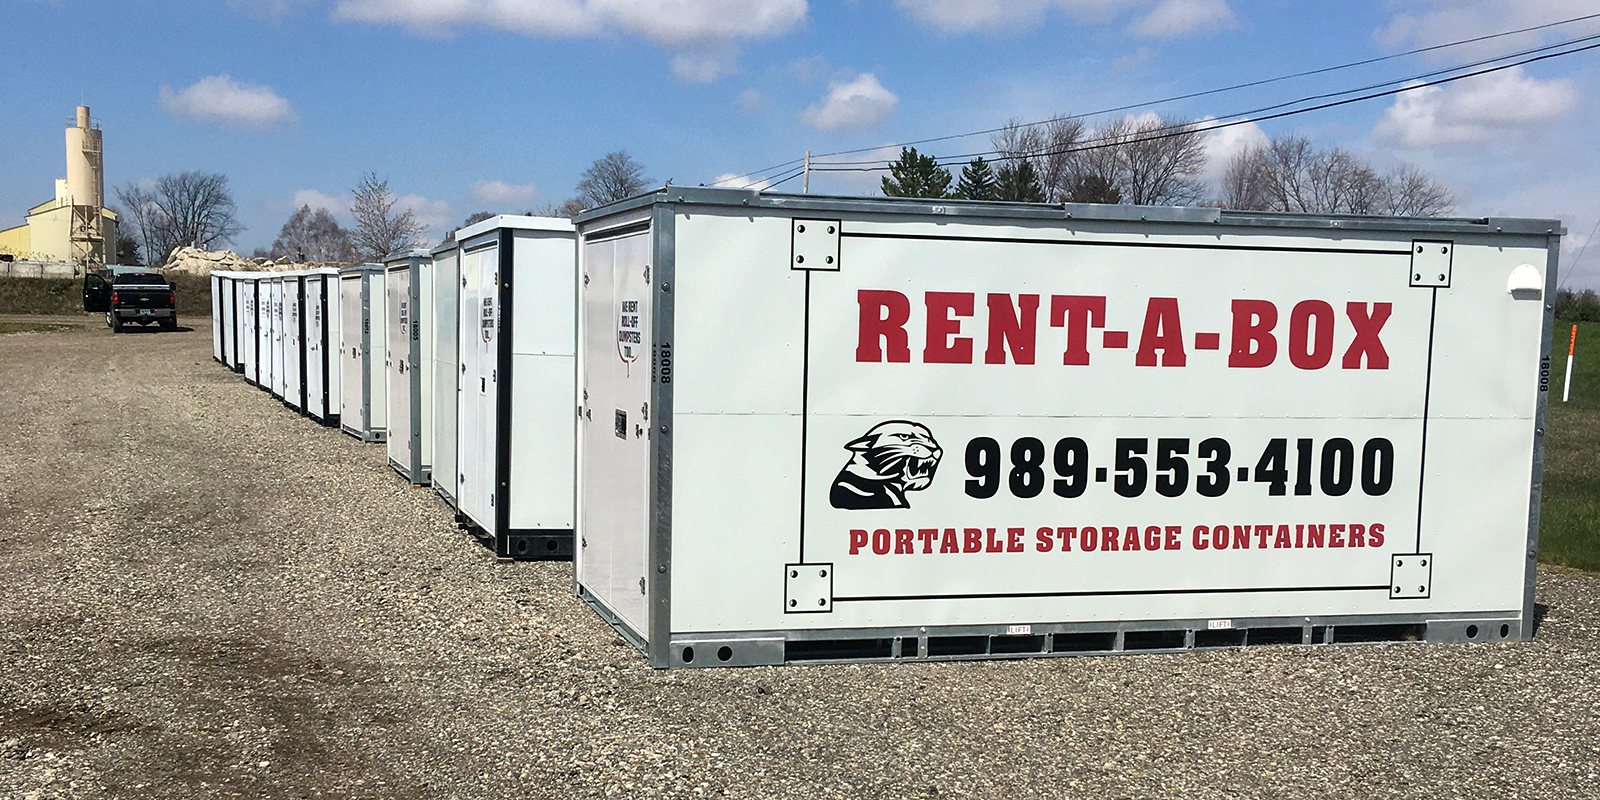 Portable Containers - Rent-A-Box